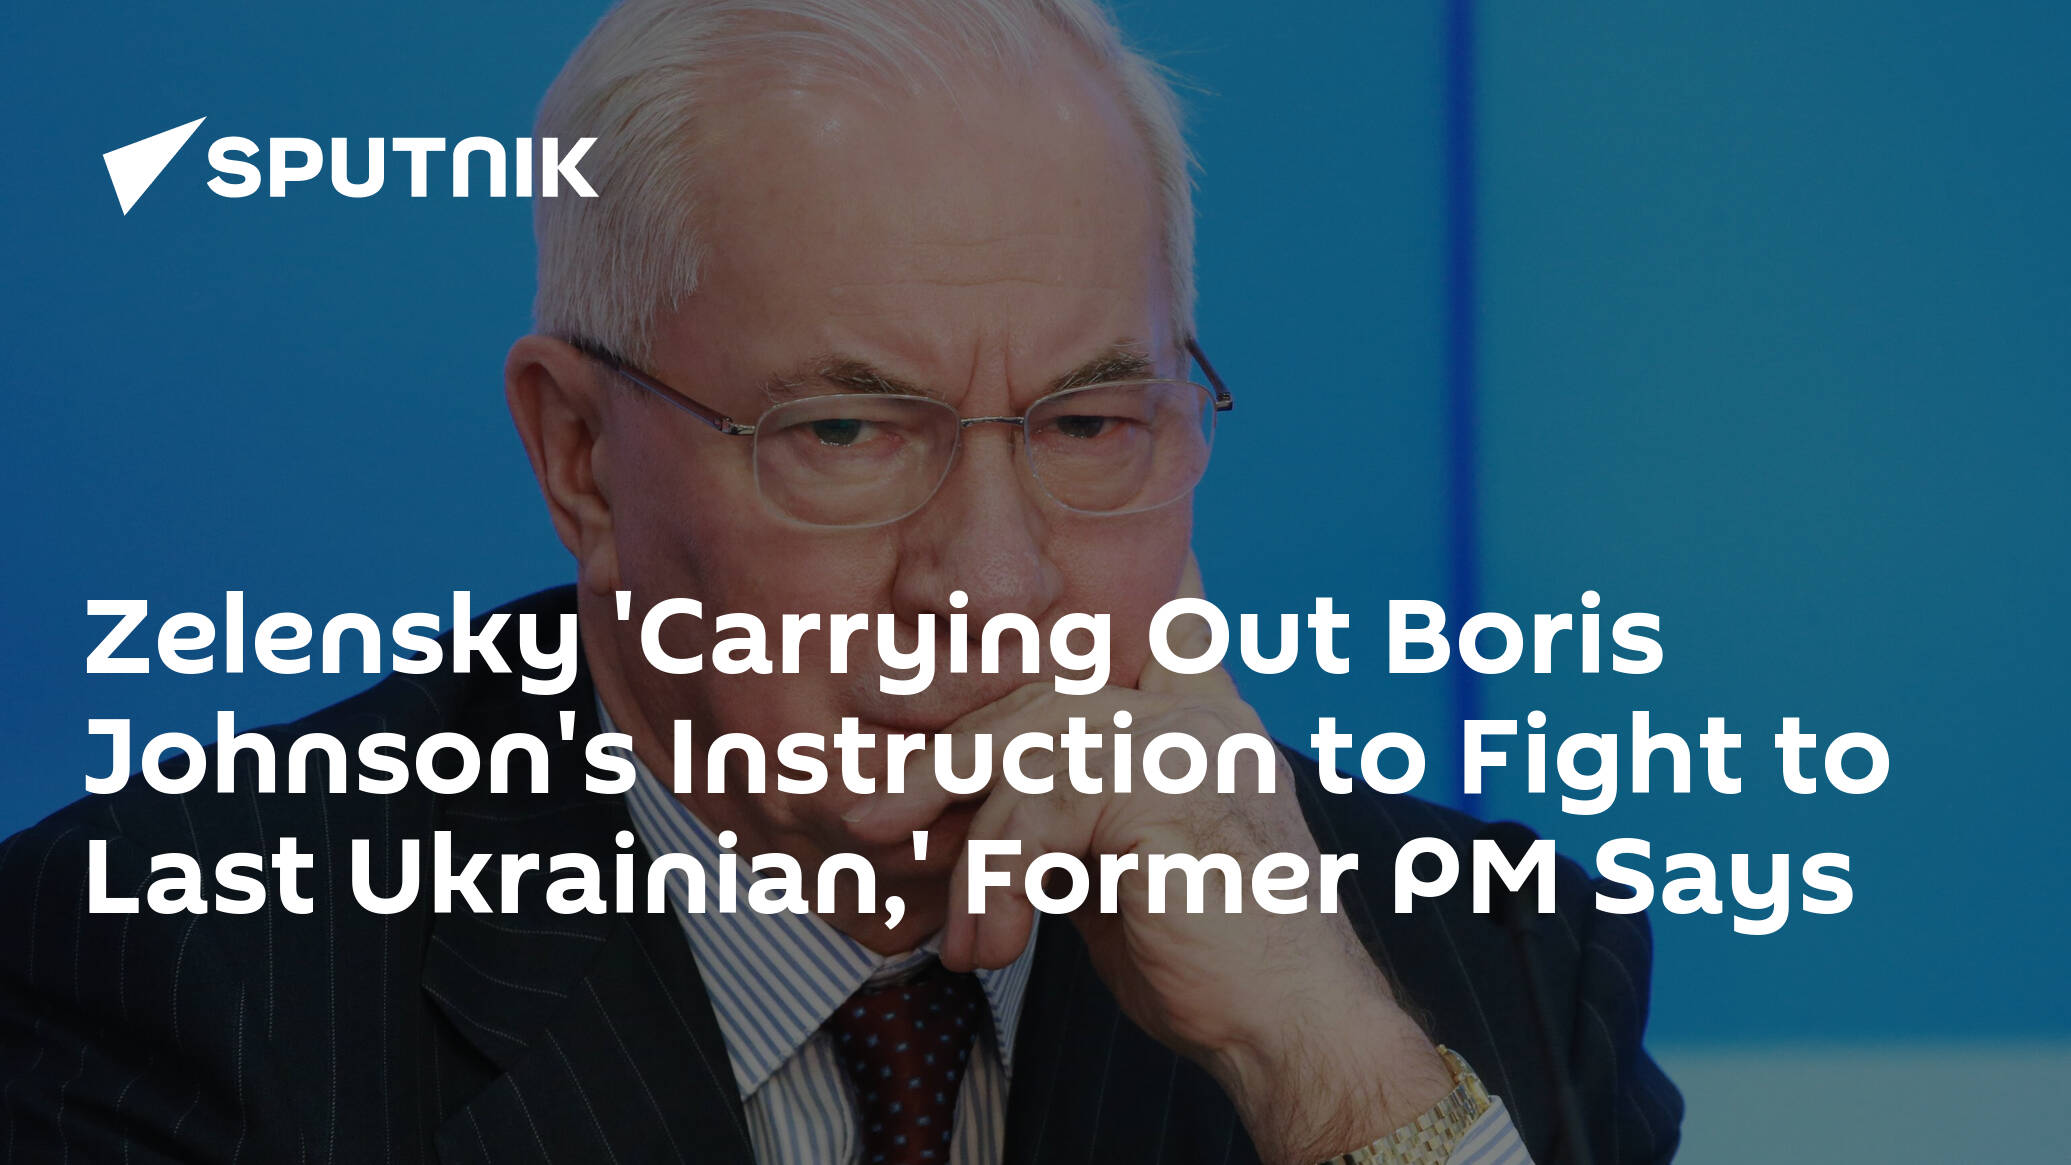 Zelensky 'Carrying Out Boris Johnson's Instruction to Fight to Last Ukrainian,' Former PM Says